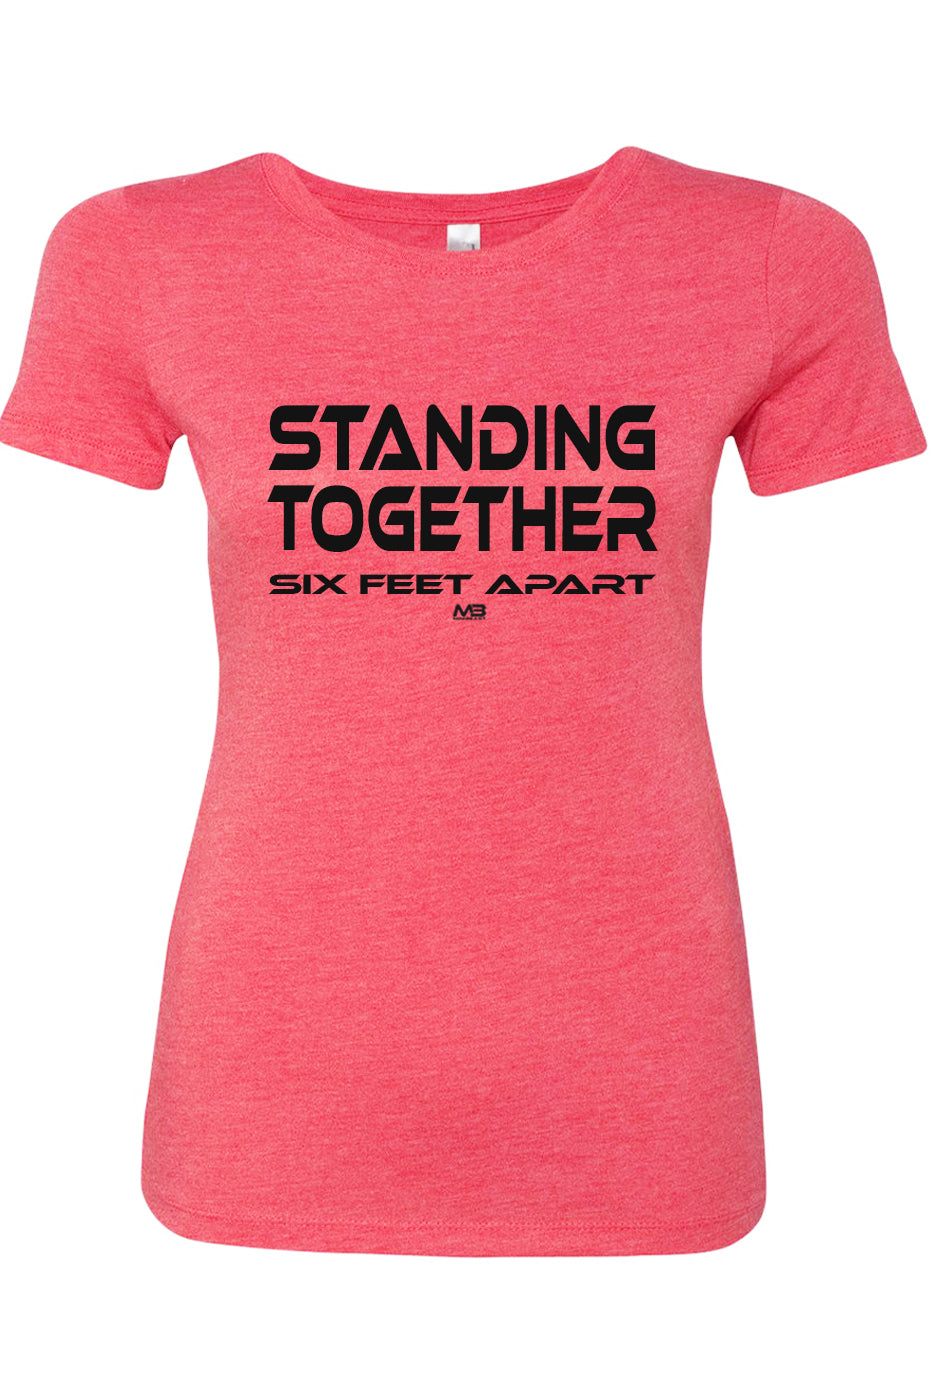 Women's "Standing Together" Fitted Tee